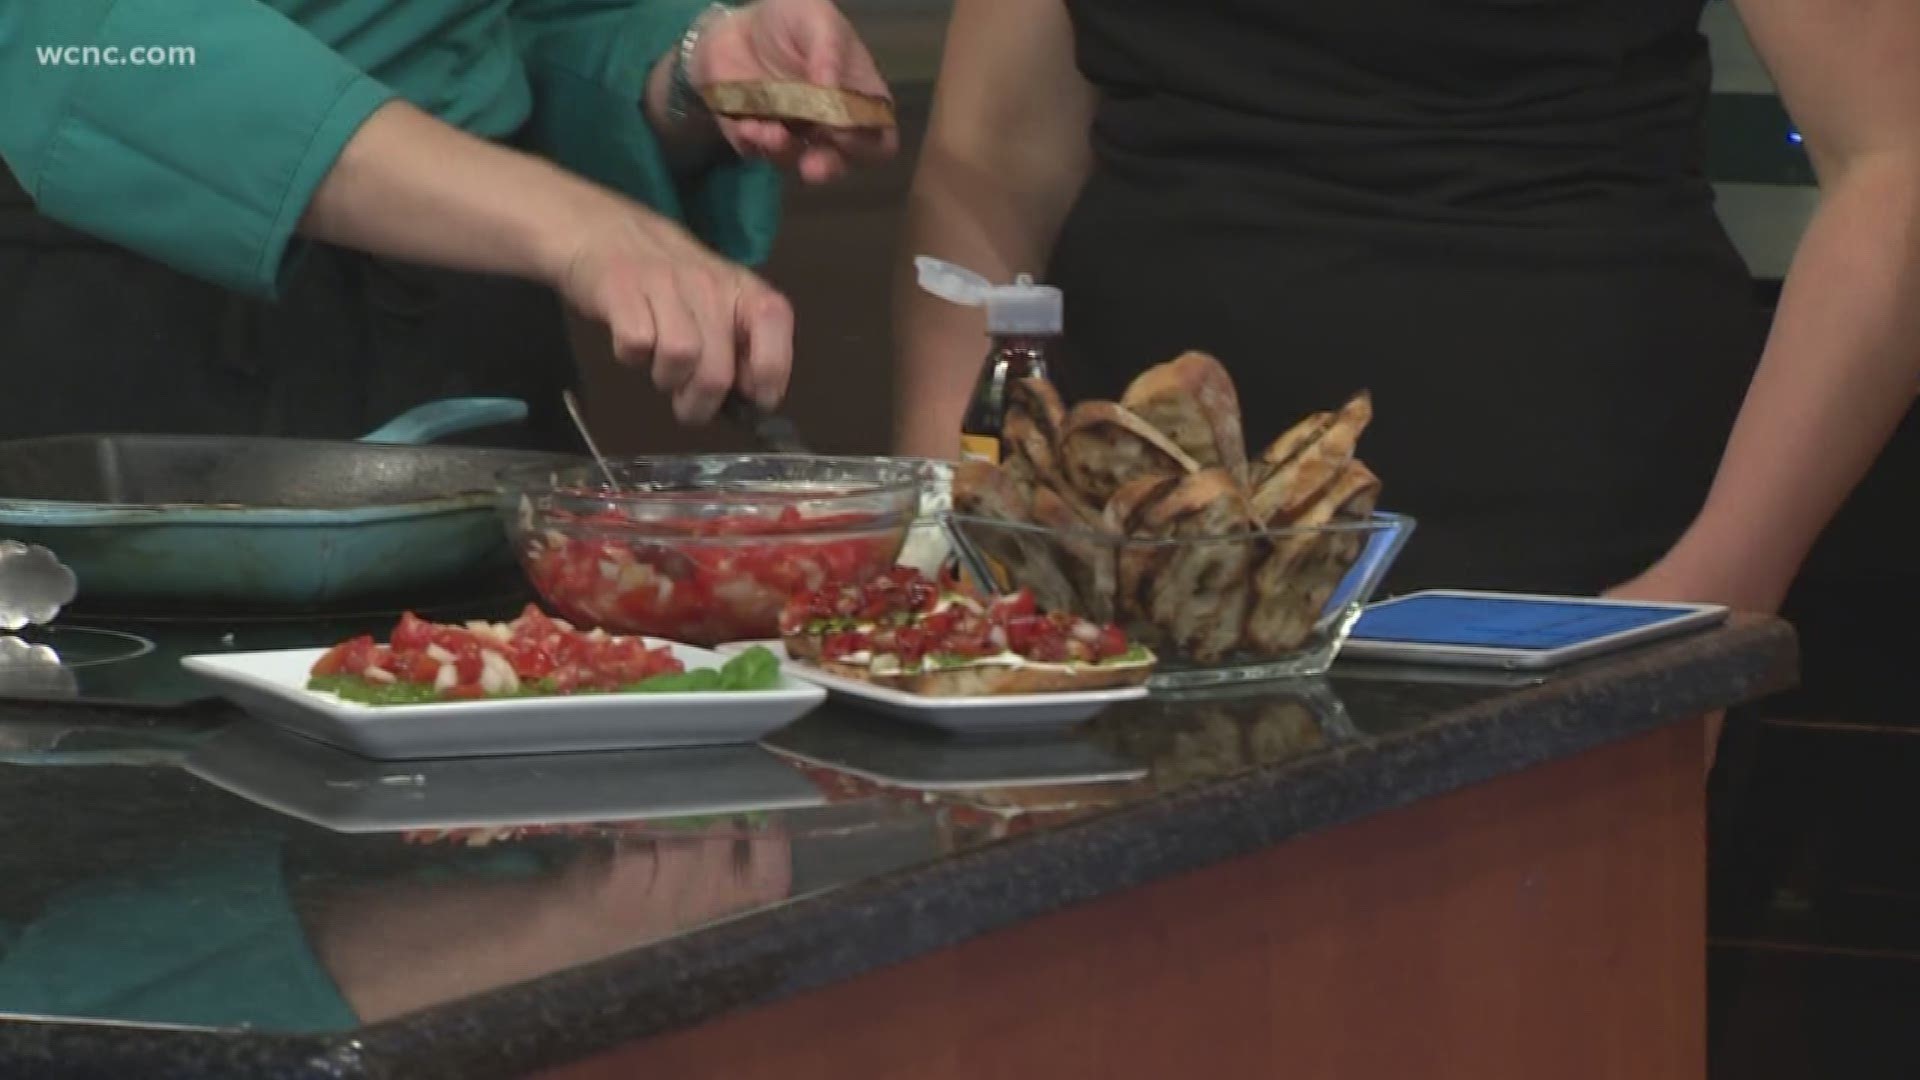 Chef Mara Norris from the Salud! cooking school in Whole Foods shares a recipe for a grilled appetizer perfect for your next party.